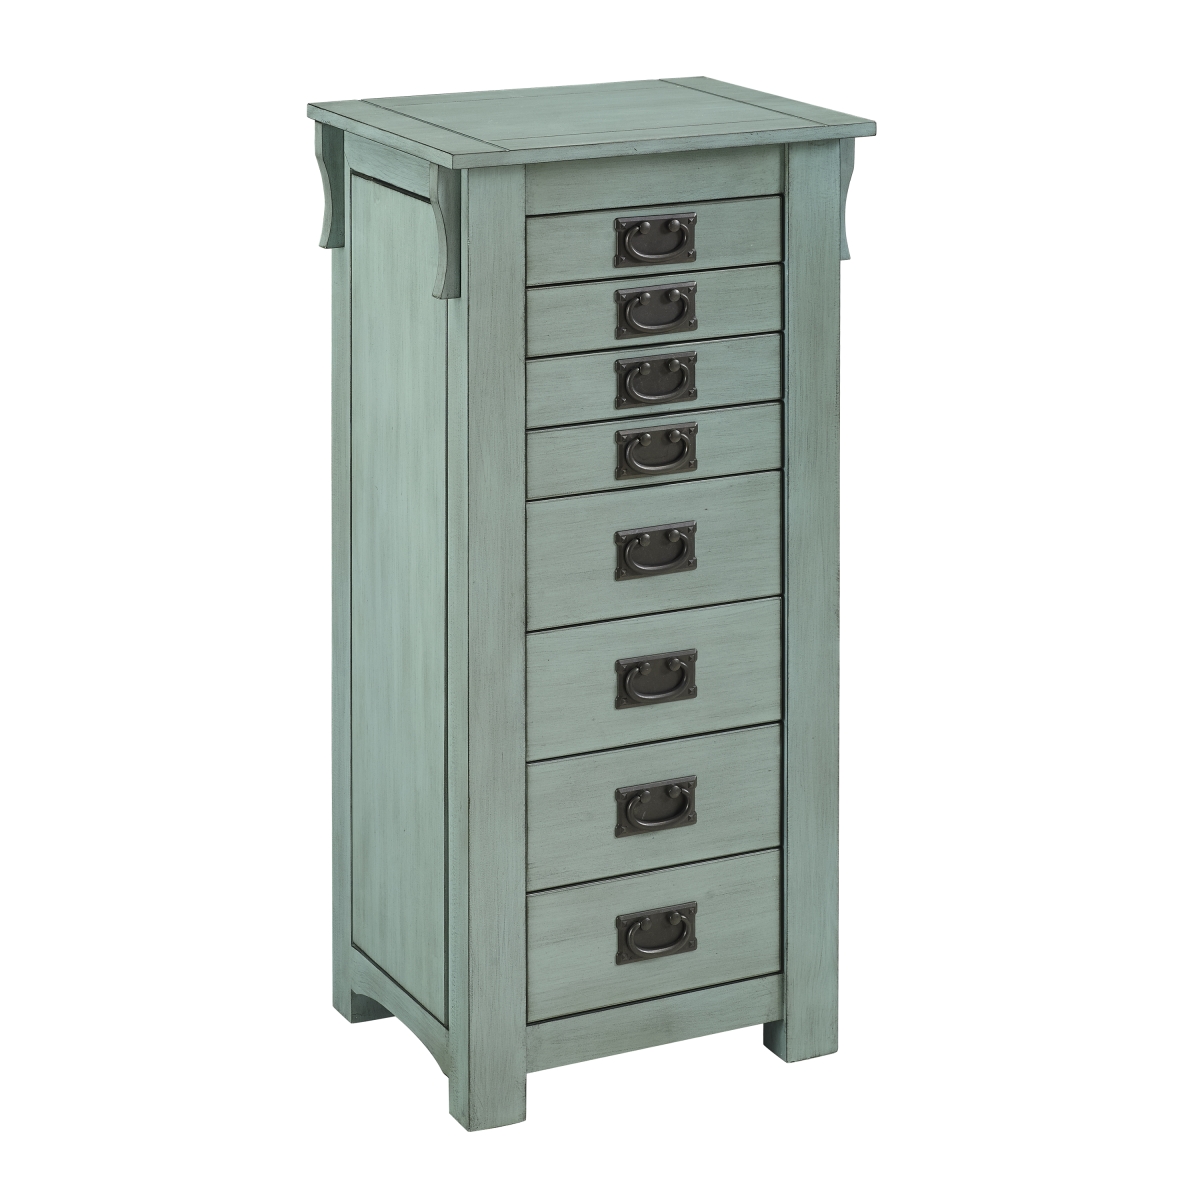 D1155j18t 40.625 X 15.25 X 19.625 In. Ziva Jewerly Armoire - Teal